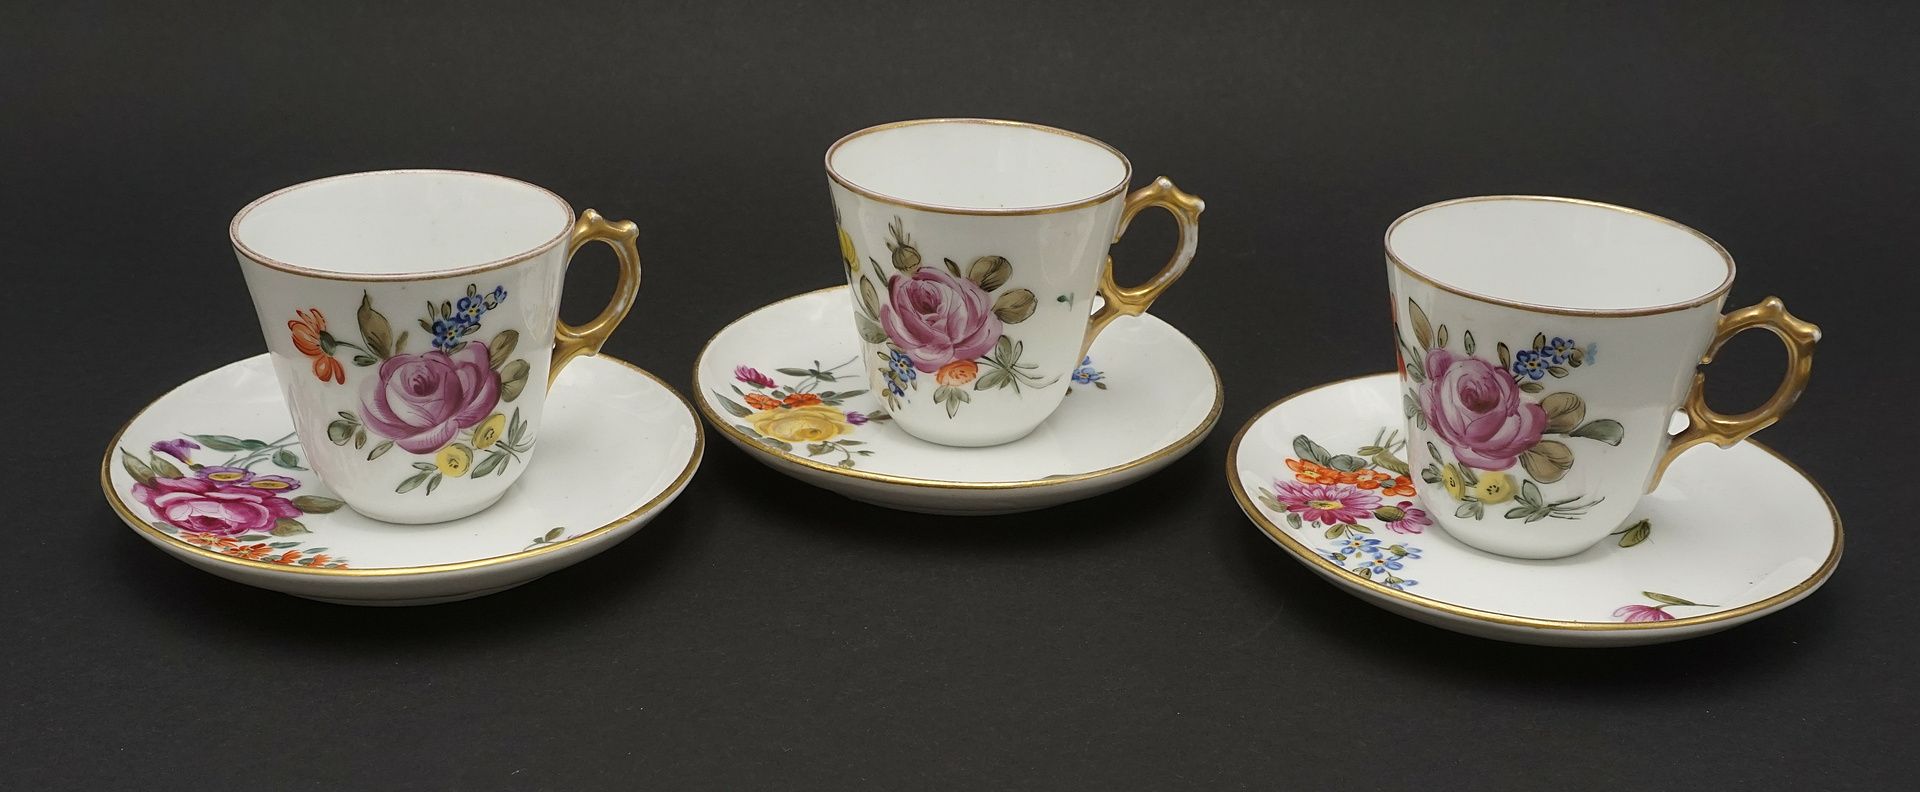 Six Ludwigsburg porcelain mocha cups and saucers - Image 2 of 4